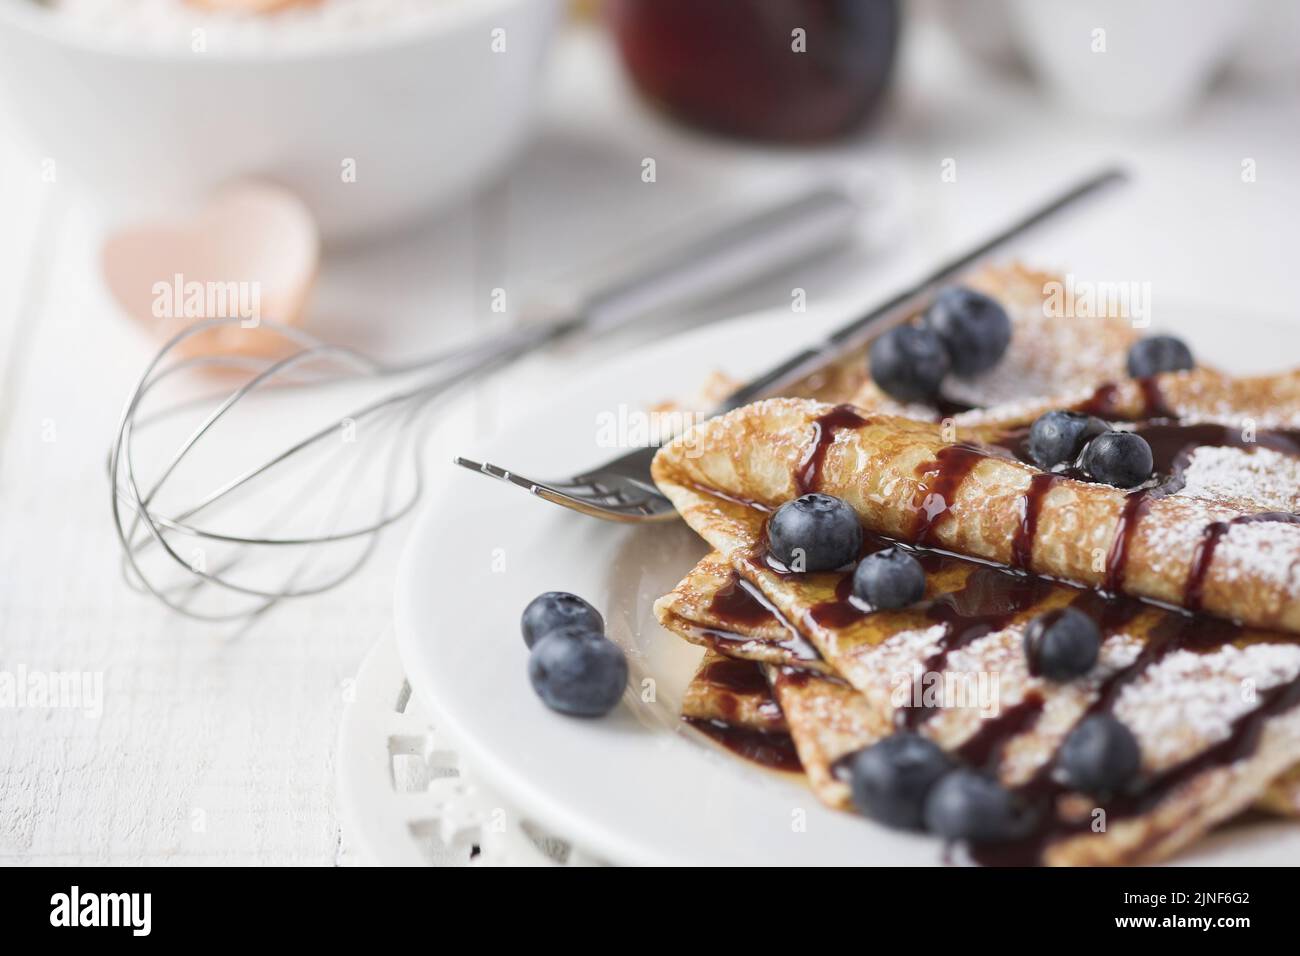 Freshly prepared crepes with blueberries & chocolate sauce - shallow dof Stock Photo